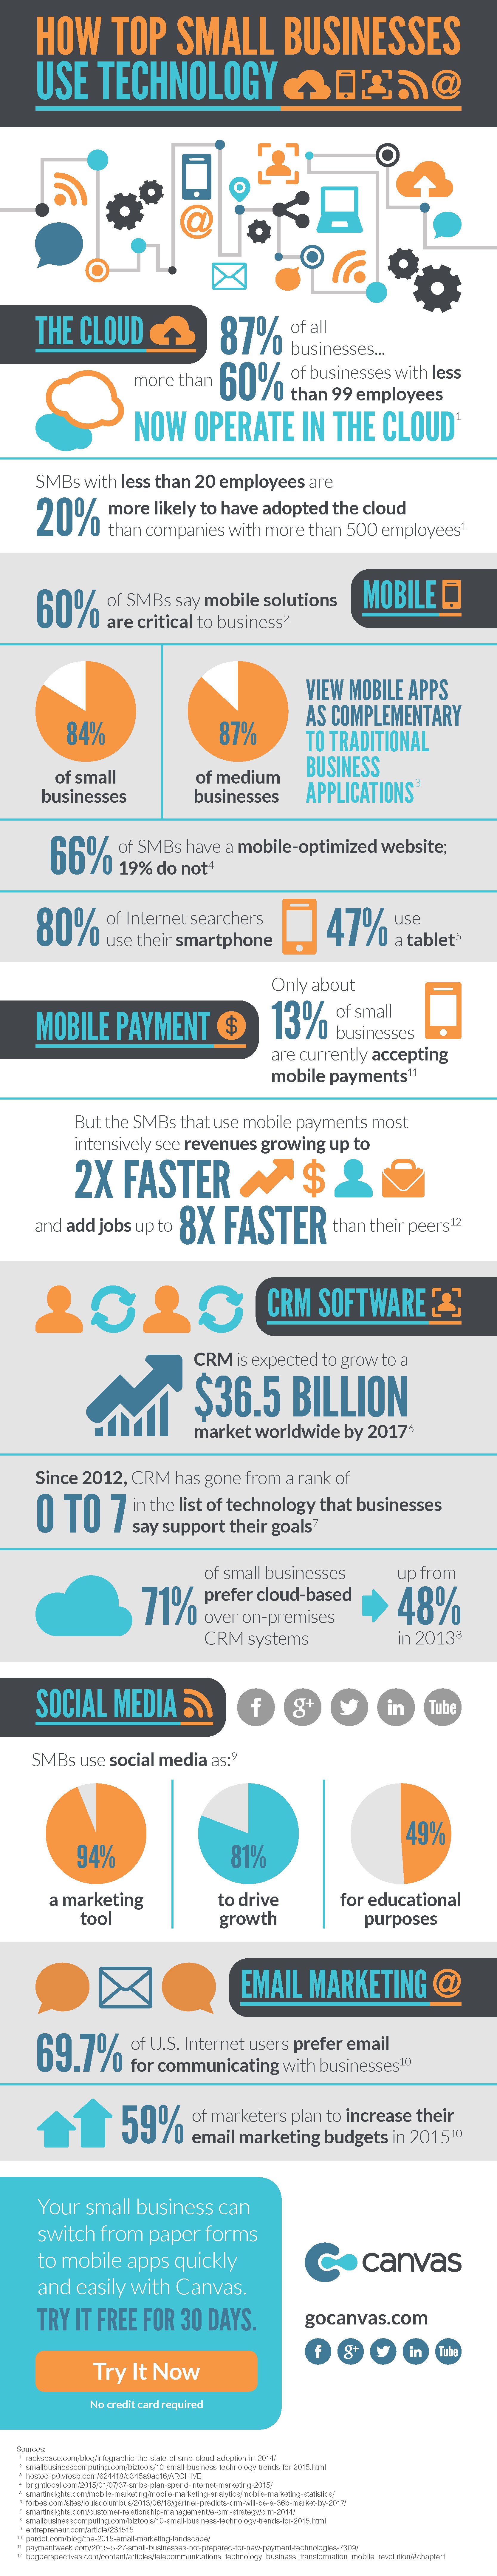 How Top Small Businesses Use Technology